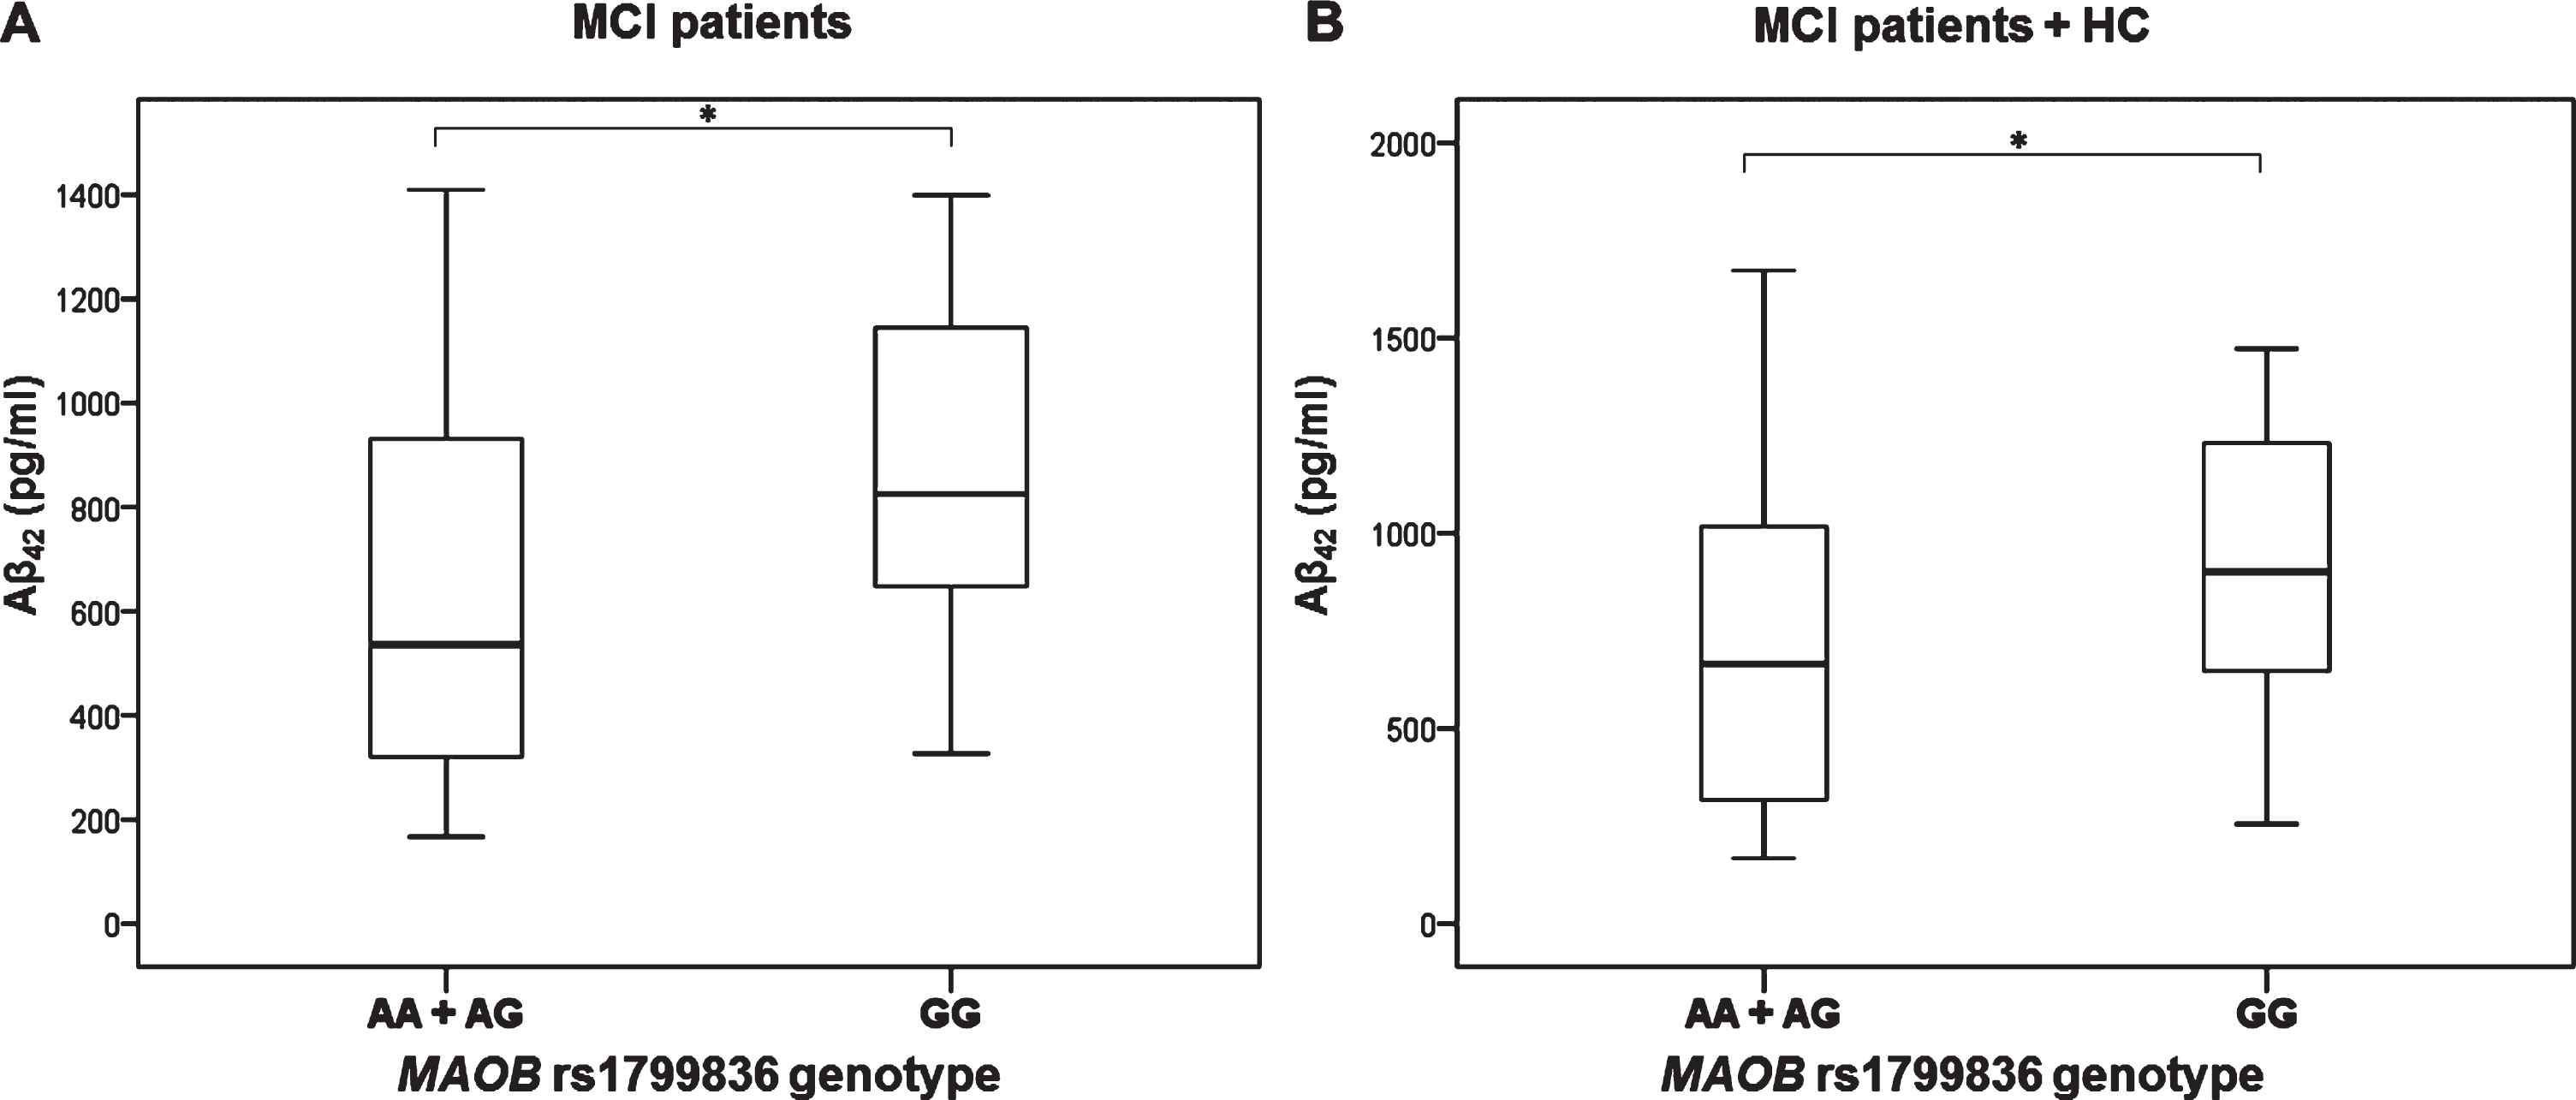 Levels of Aβ42 in A) MCI patients and B) MCI patients and HC with different MAO-B rs1799836 genotype. *p < 0.05.